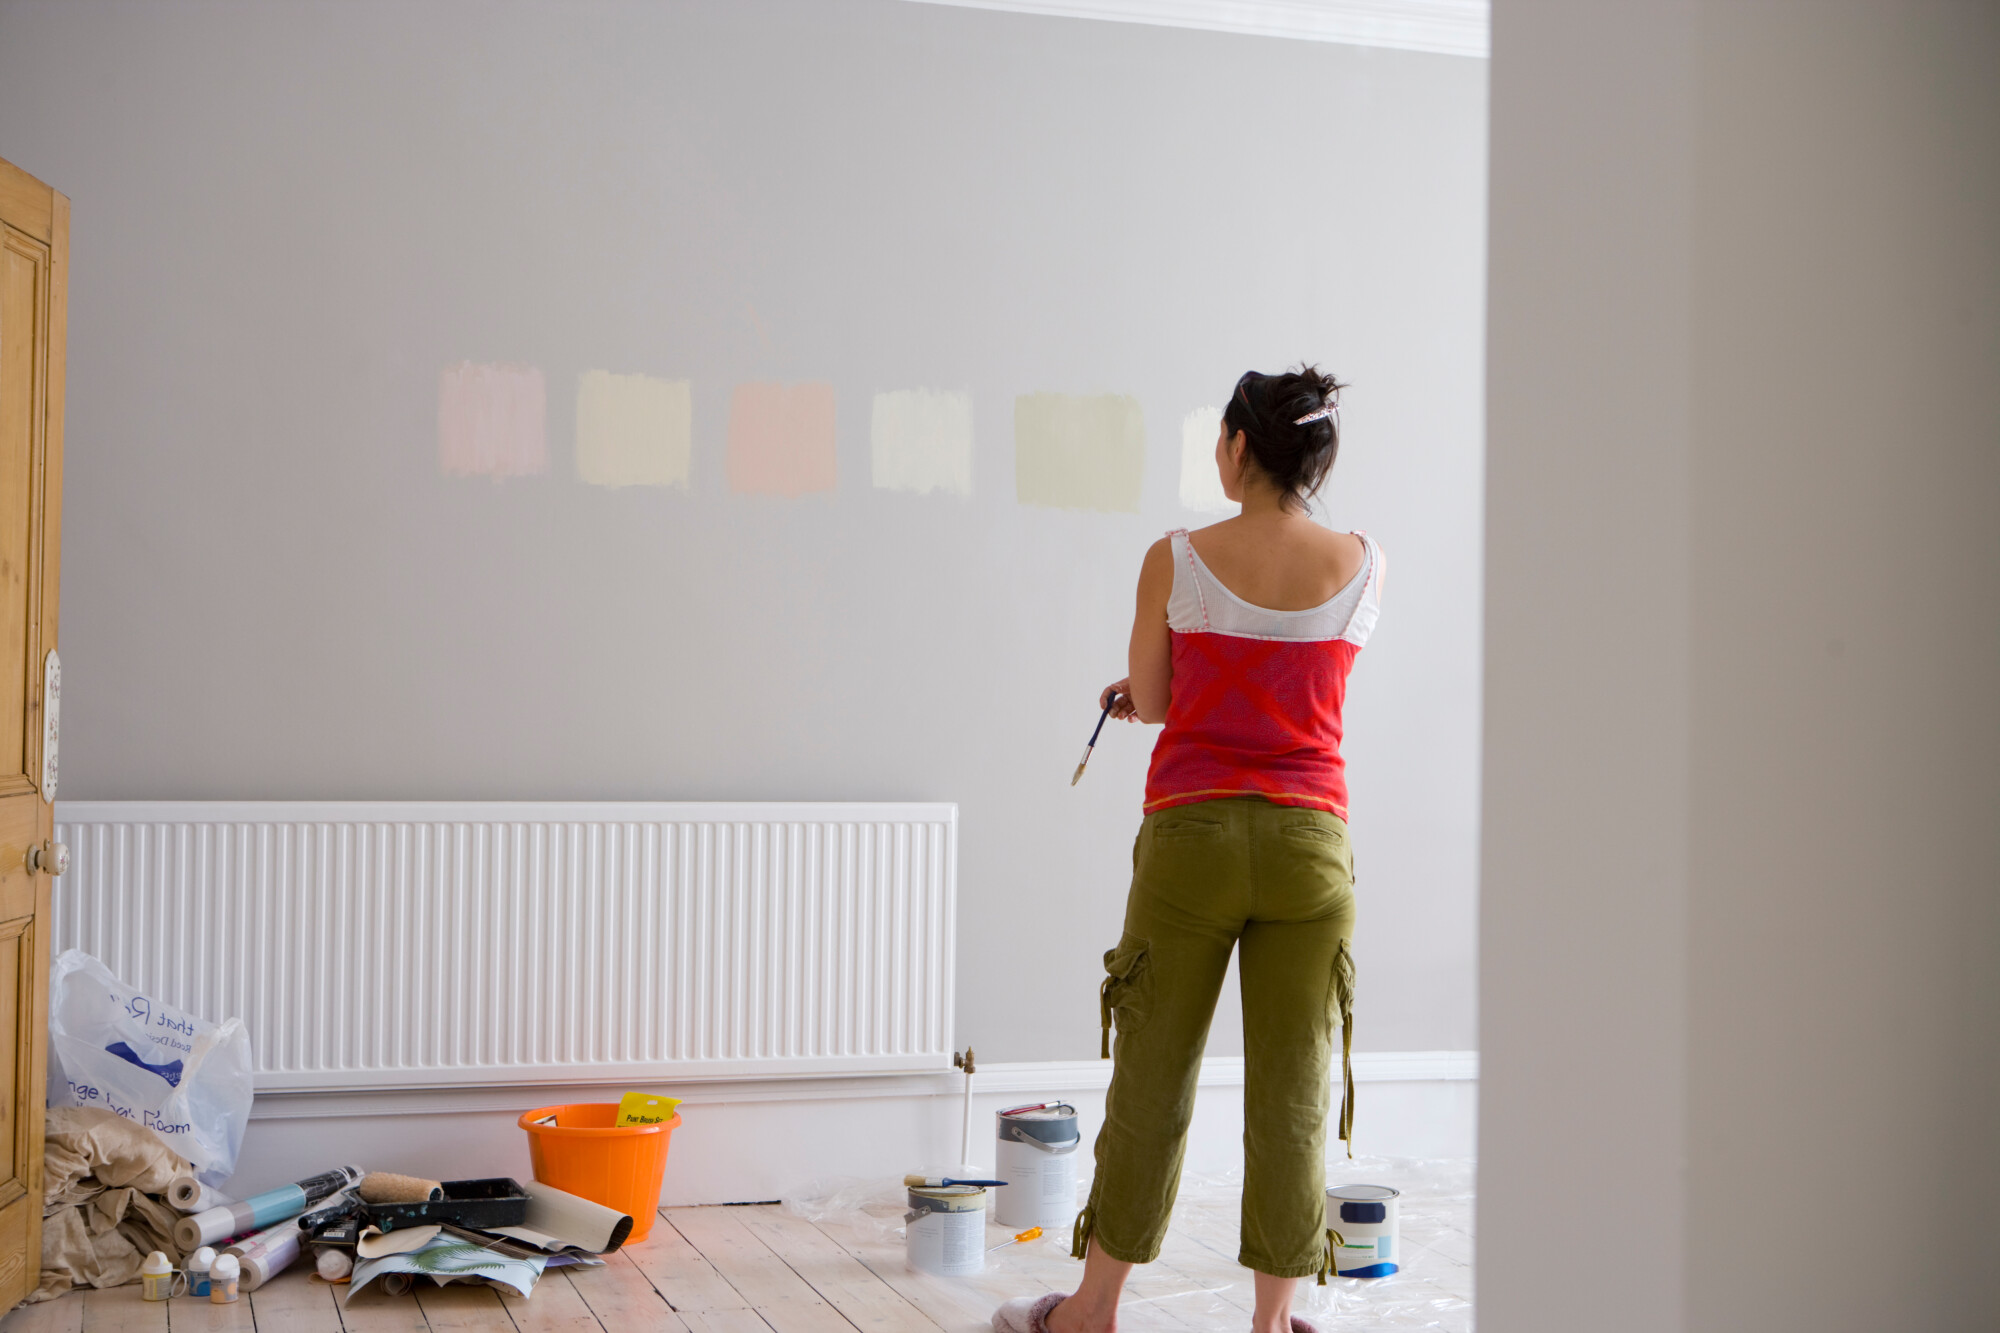 Give your home a fresh new look and feel in 2023 with these simple home makeover ideas. See our guide to the top trends and tips to transform your interior.